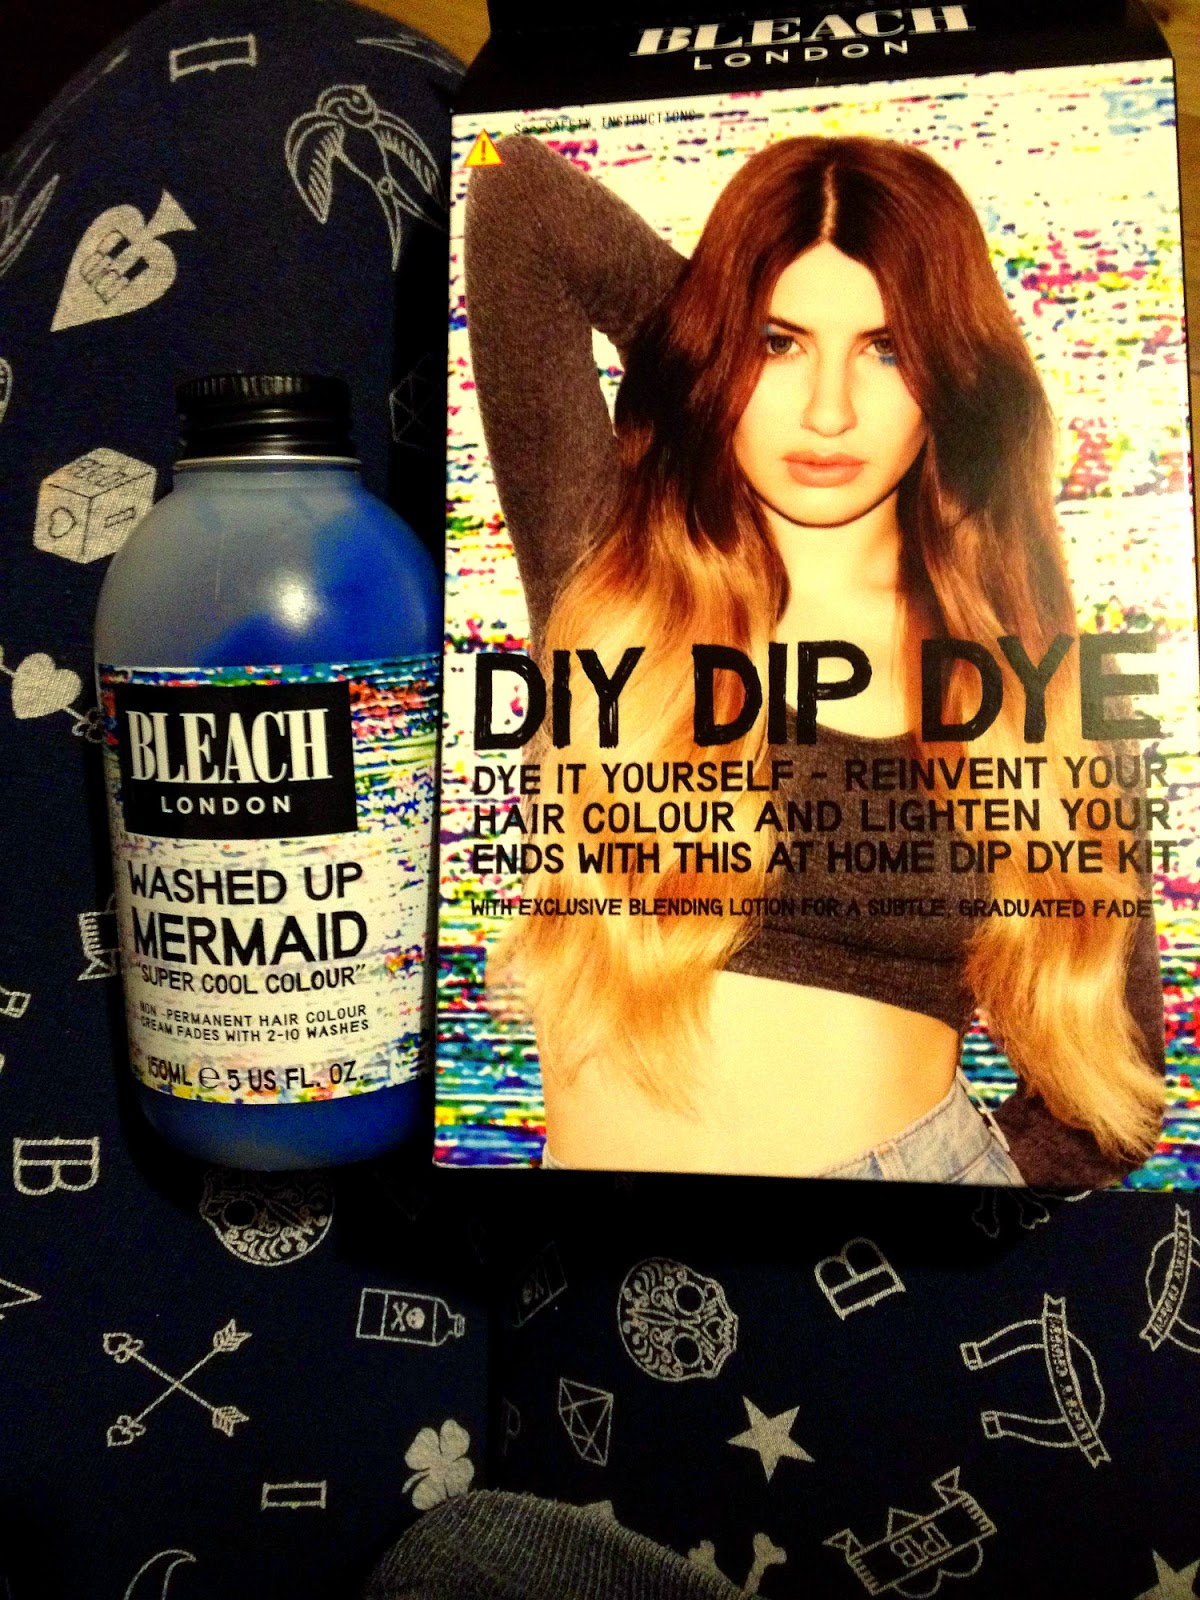 Bleach London Dip Dye Kit Washed Up Mermaid Thriftylilpixie